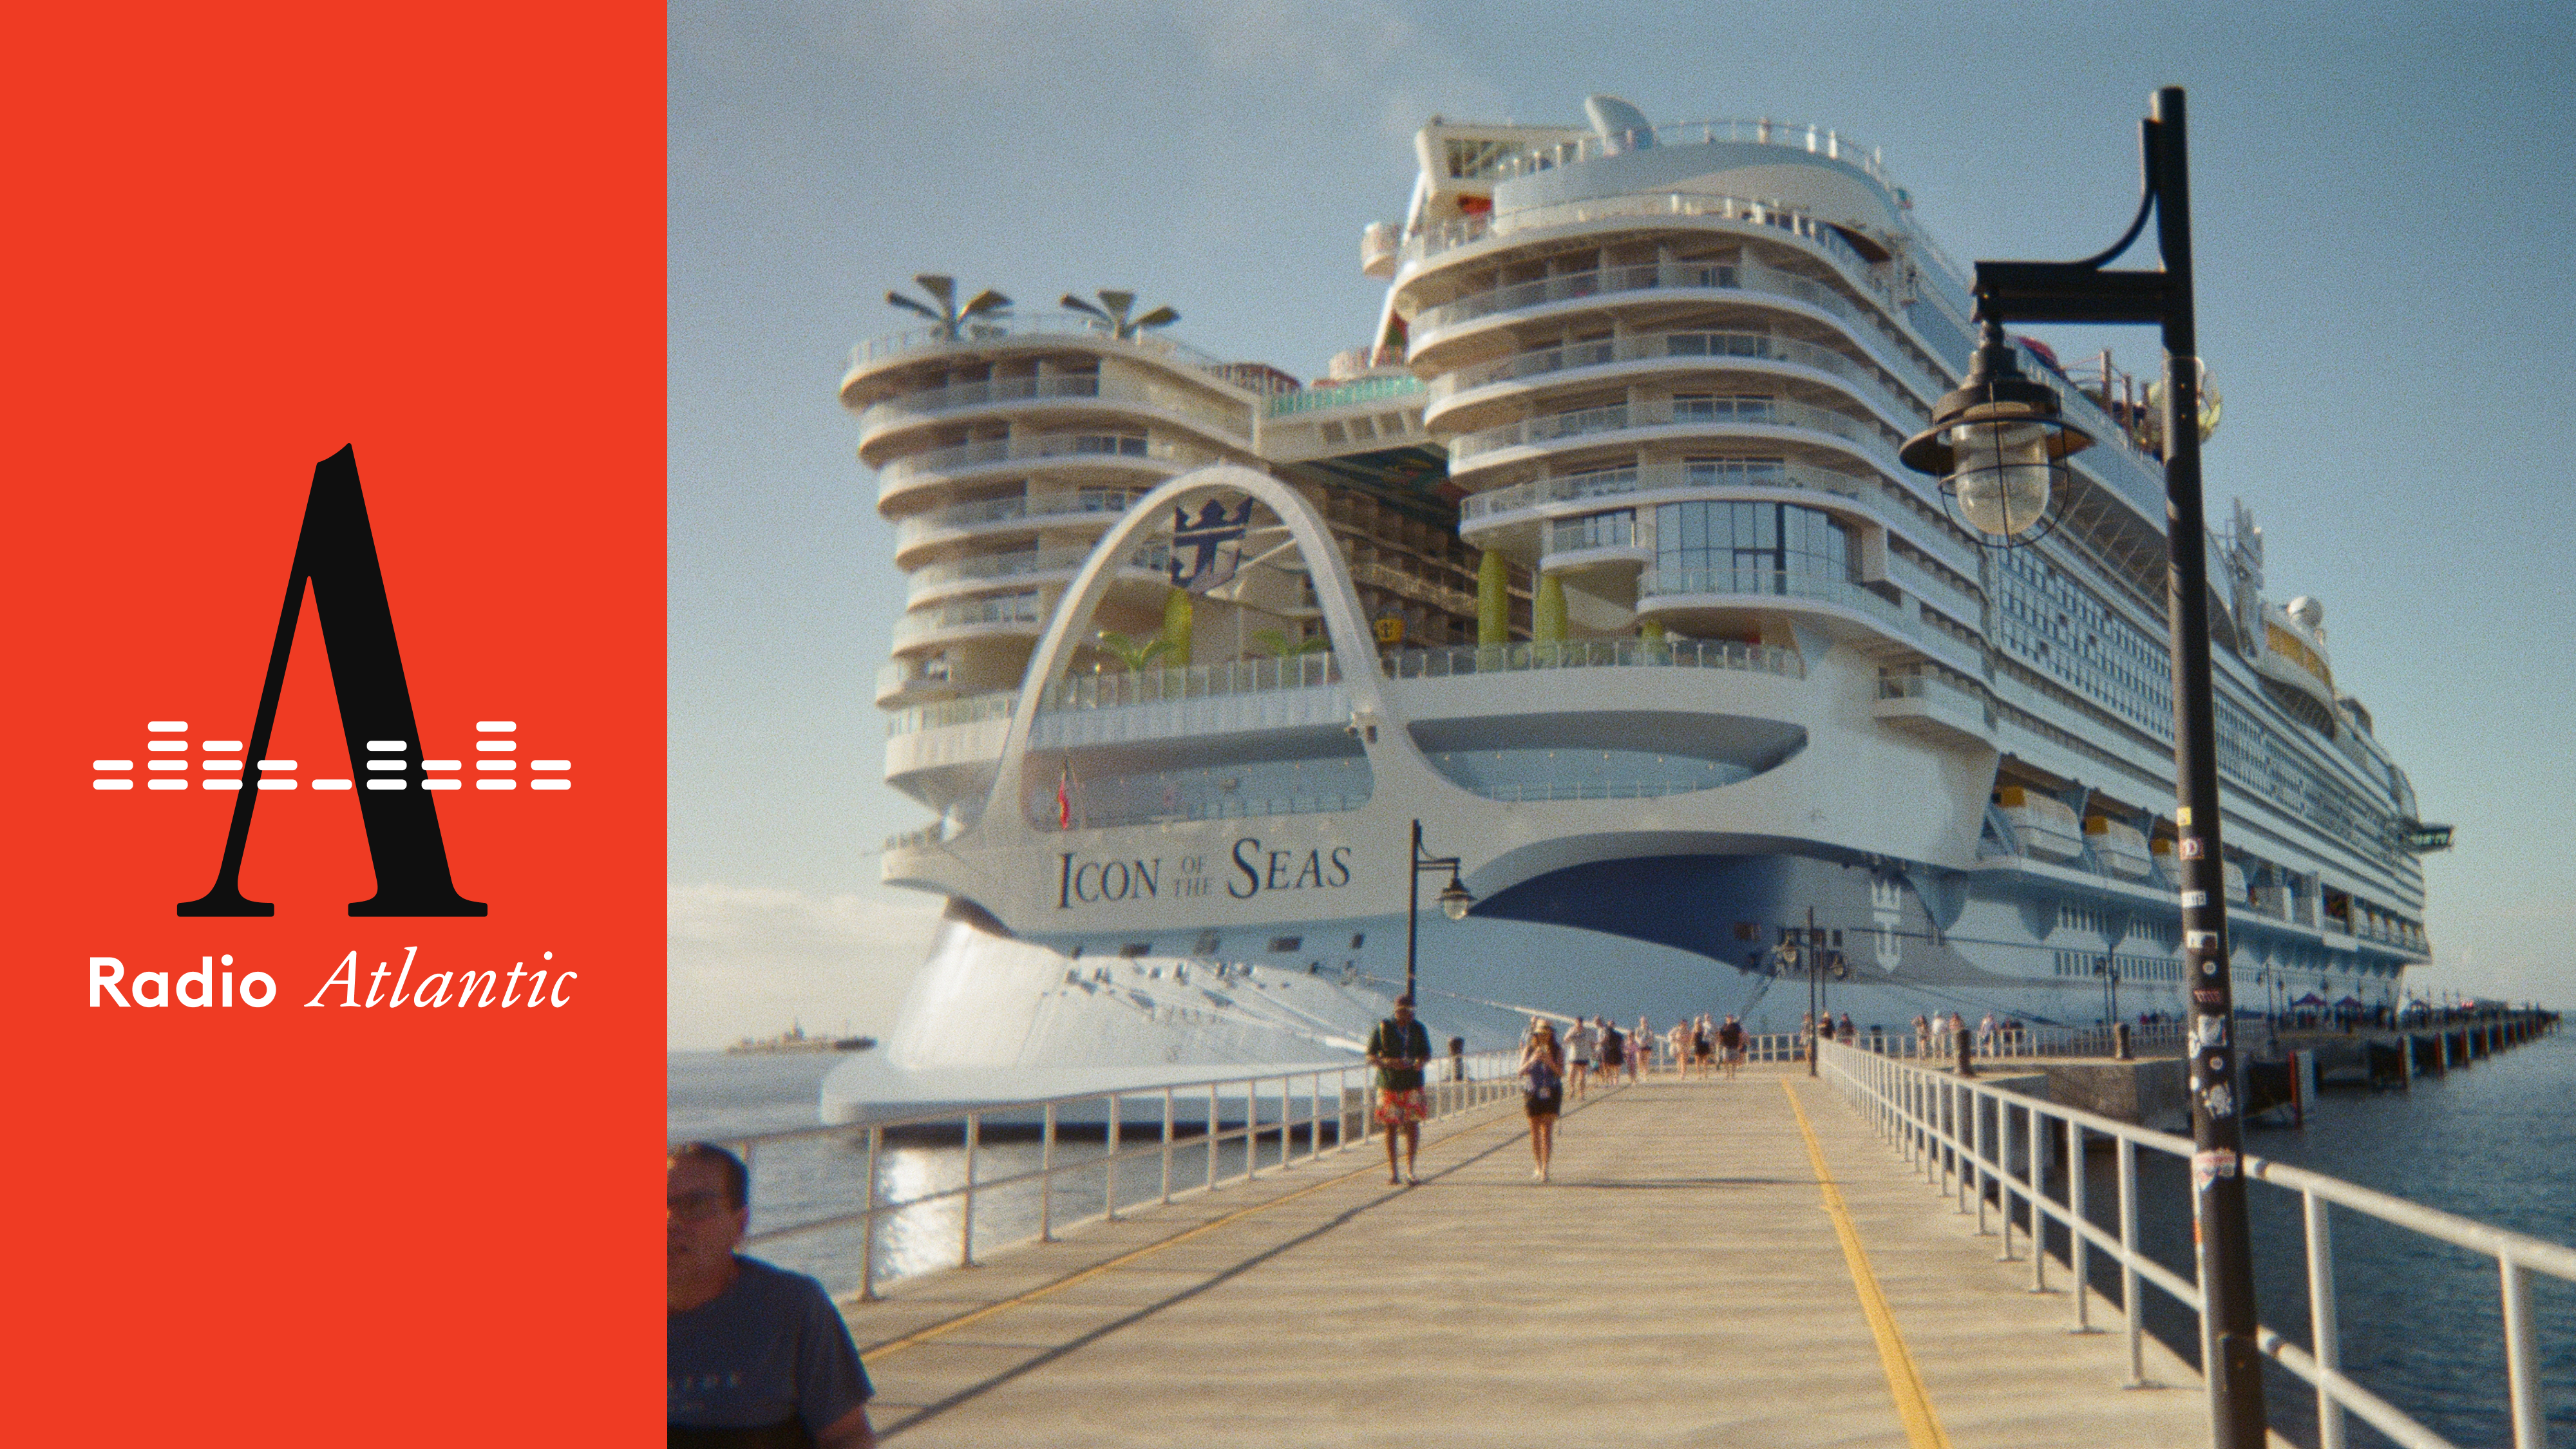 The Icon of the Seas, the largest cruise ship in the world